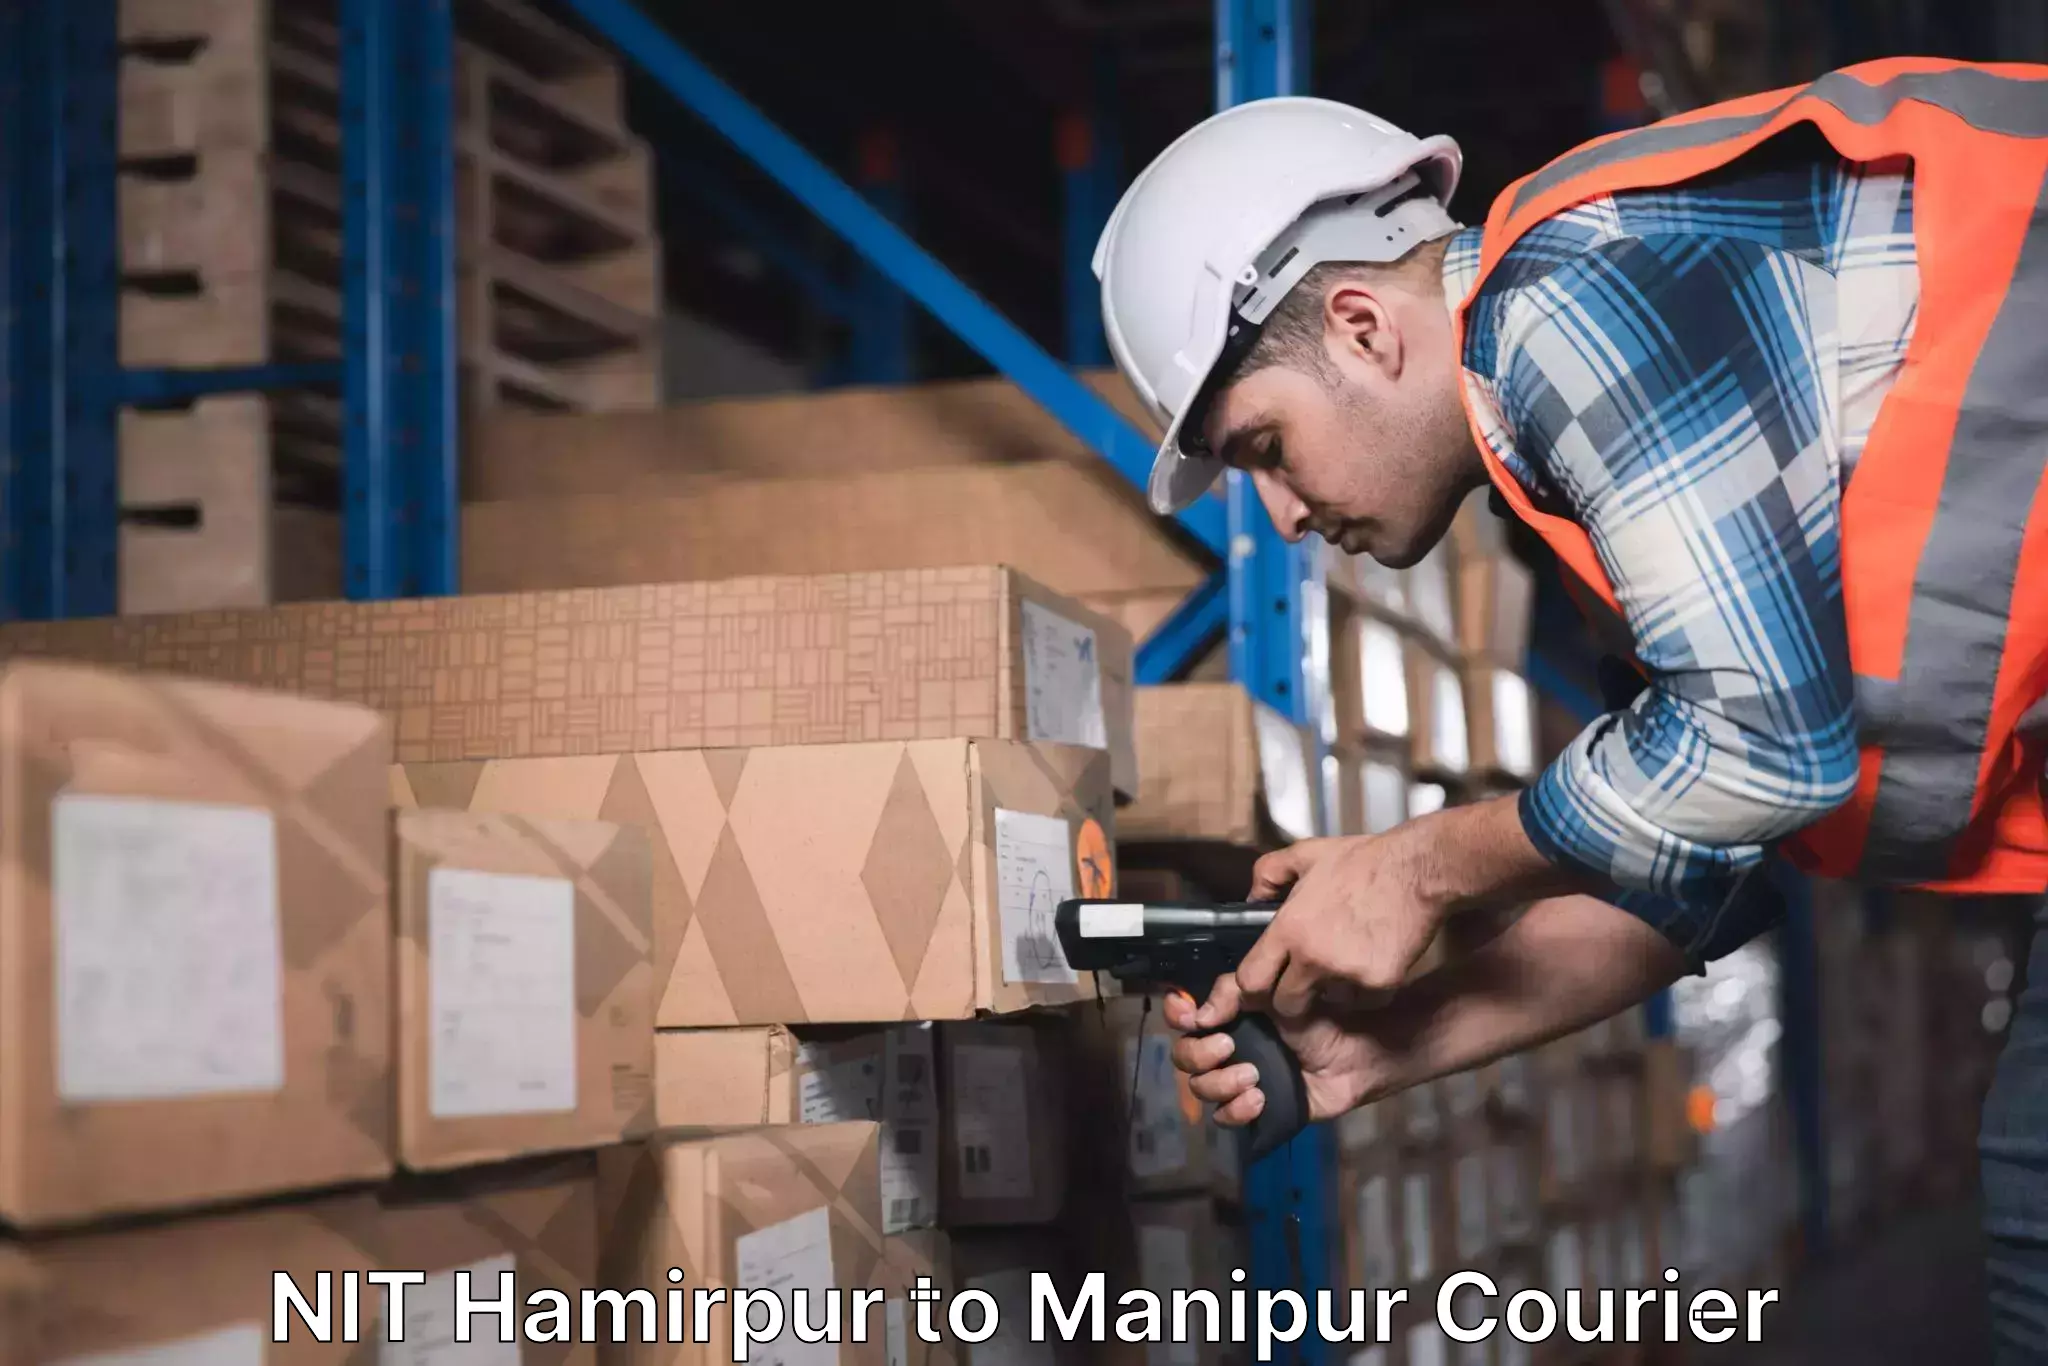 Courier app NIT Hamirpur to Manipur